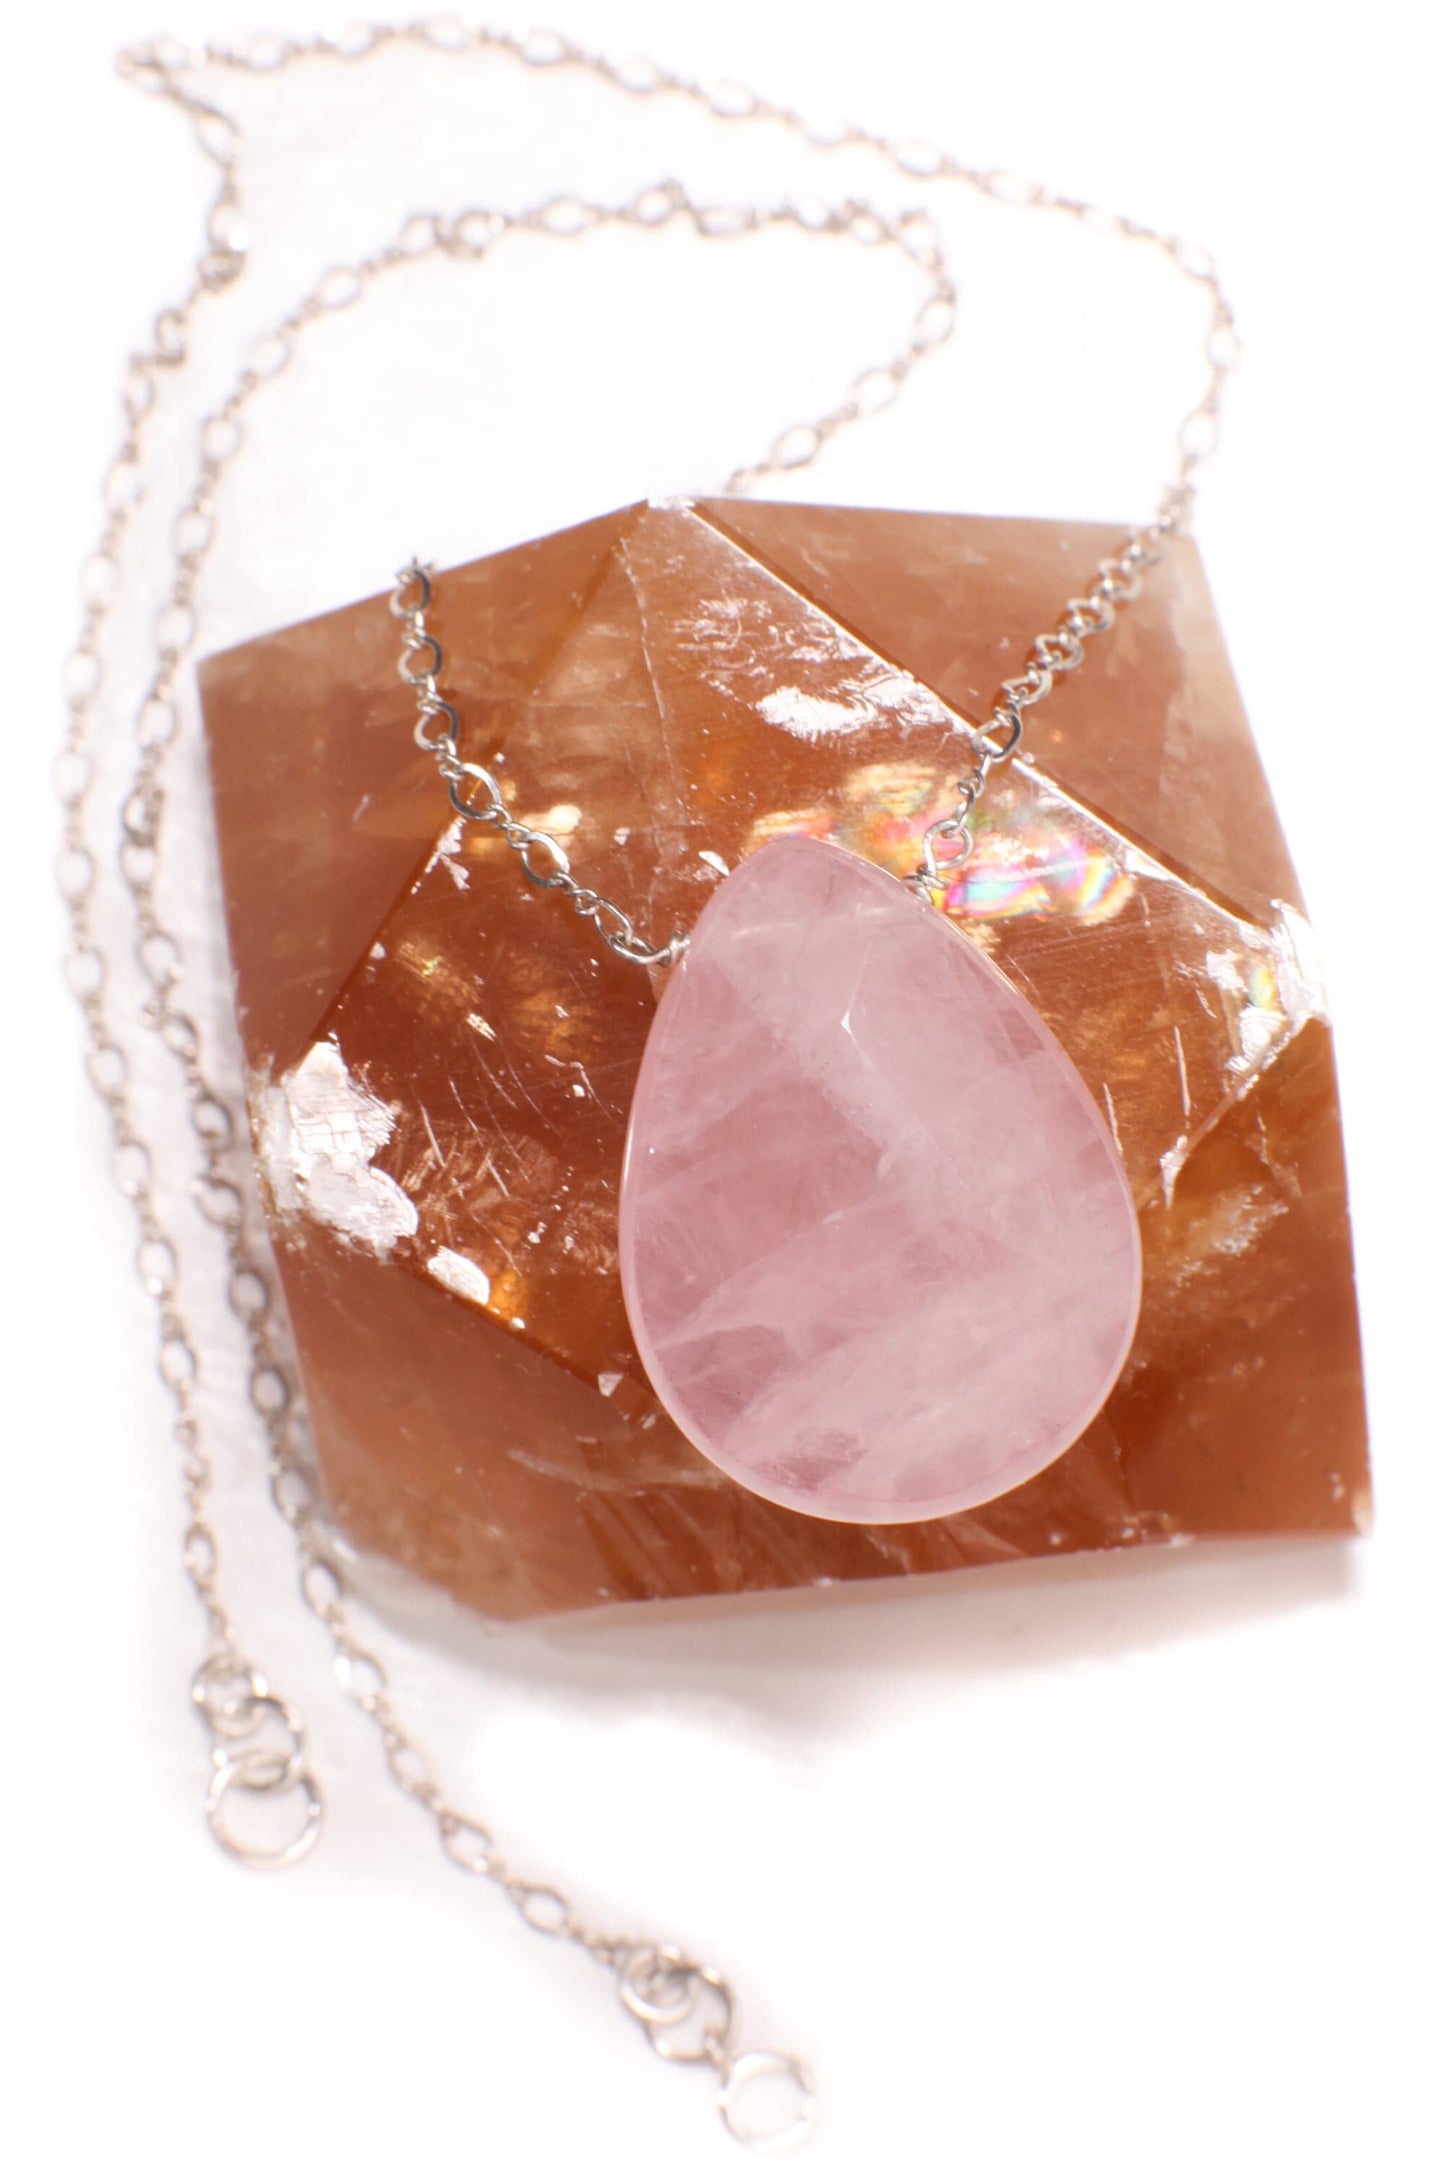 Madagascar Rose Quartz Faceted Pear Drop 18x25mm, Natural Gemstones in 925 Sterling Silver Chain or 14K Gold Filled Chain